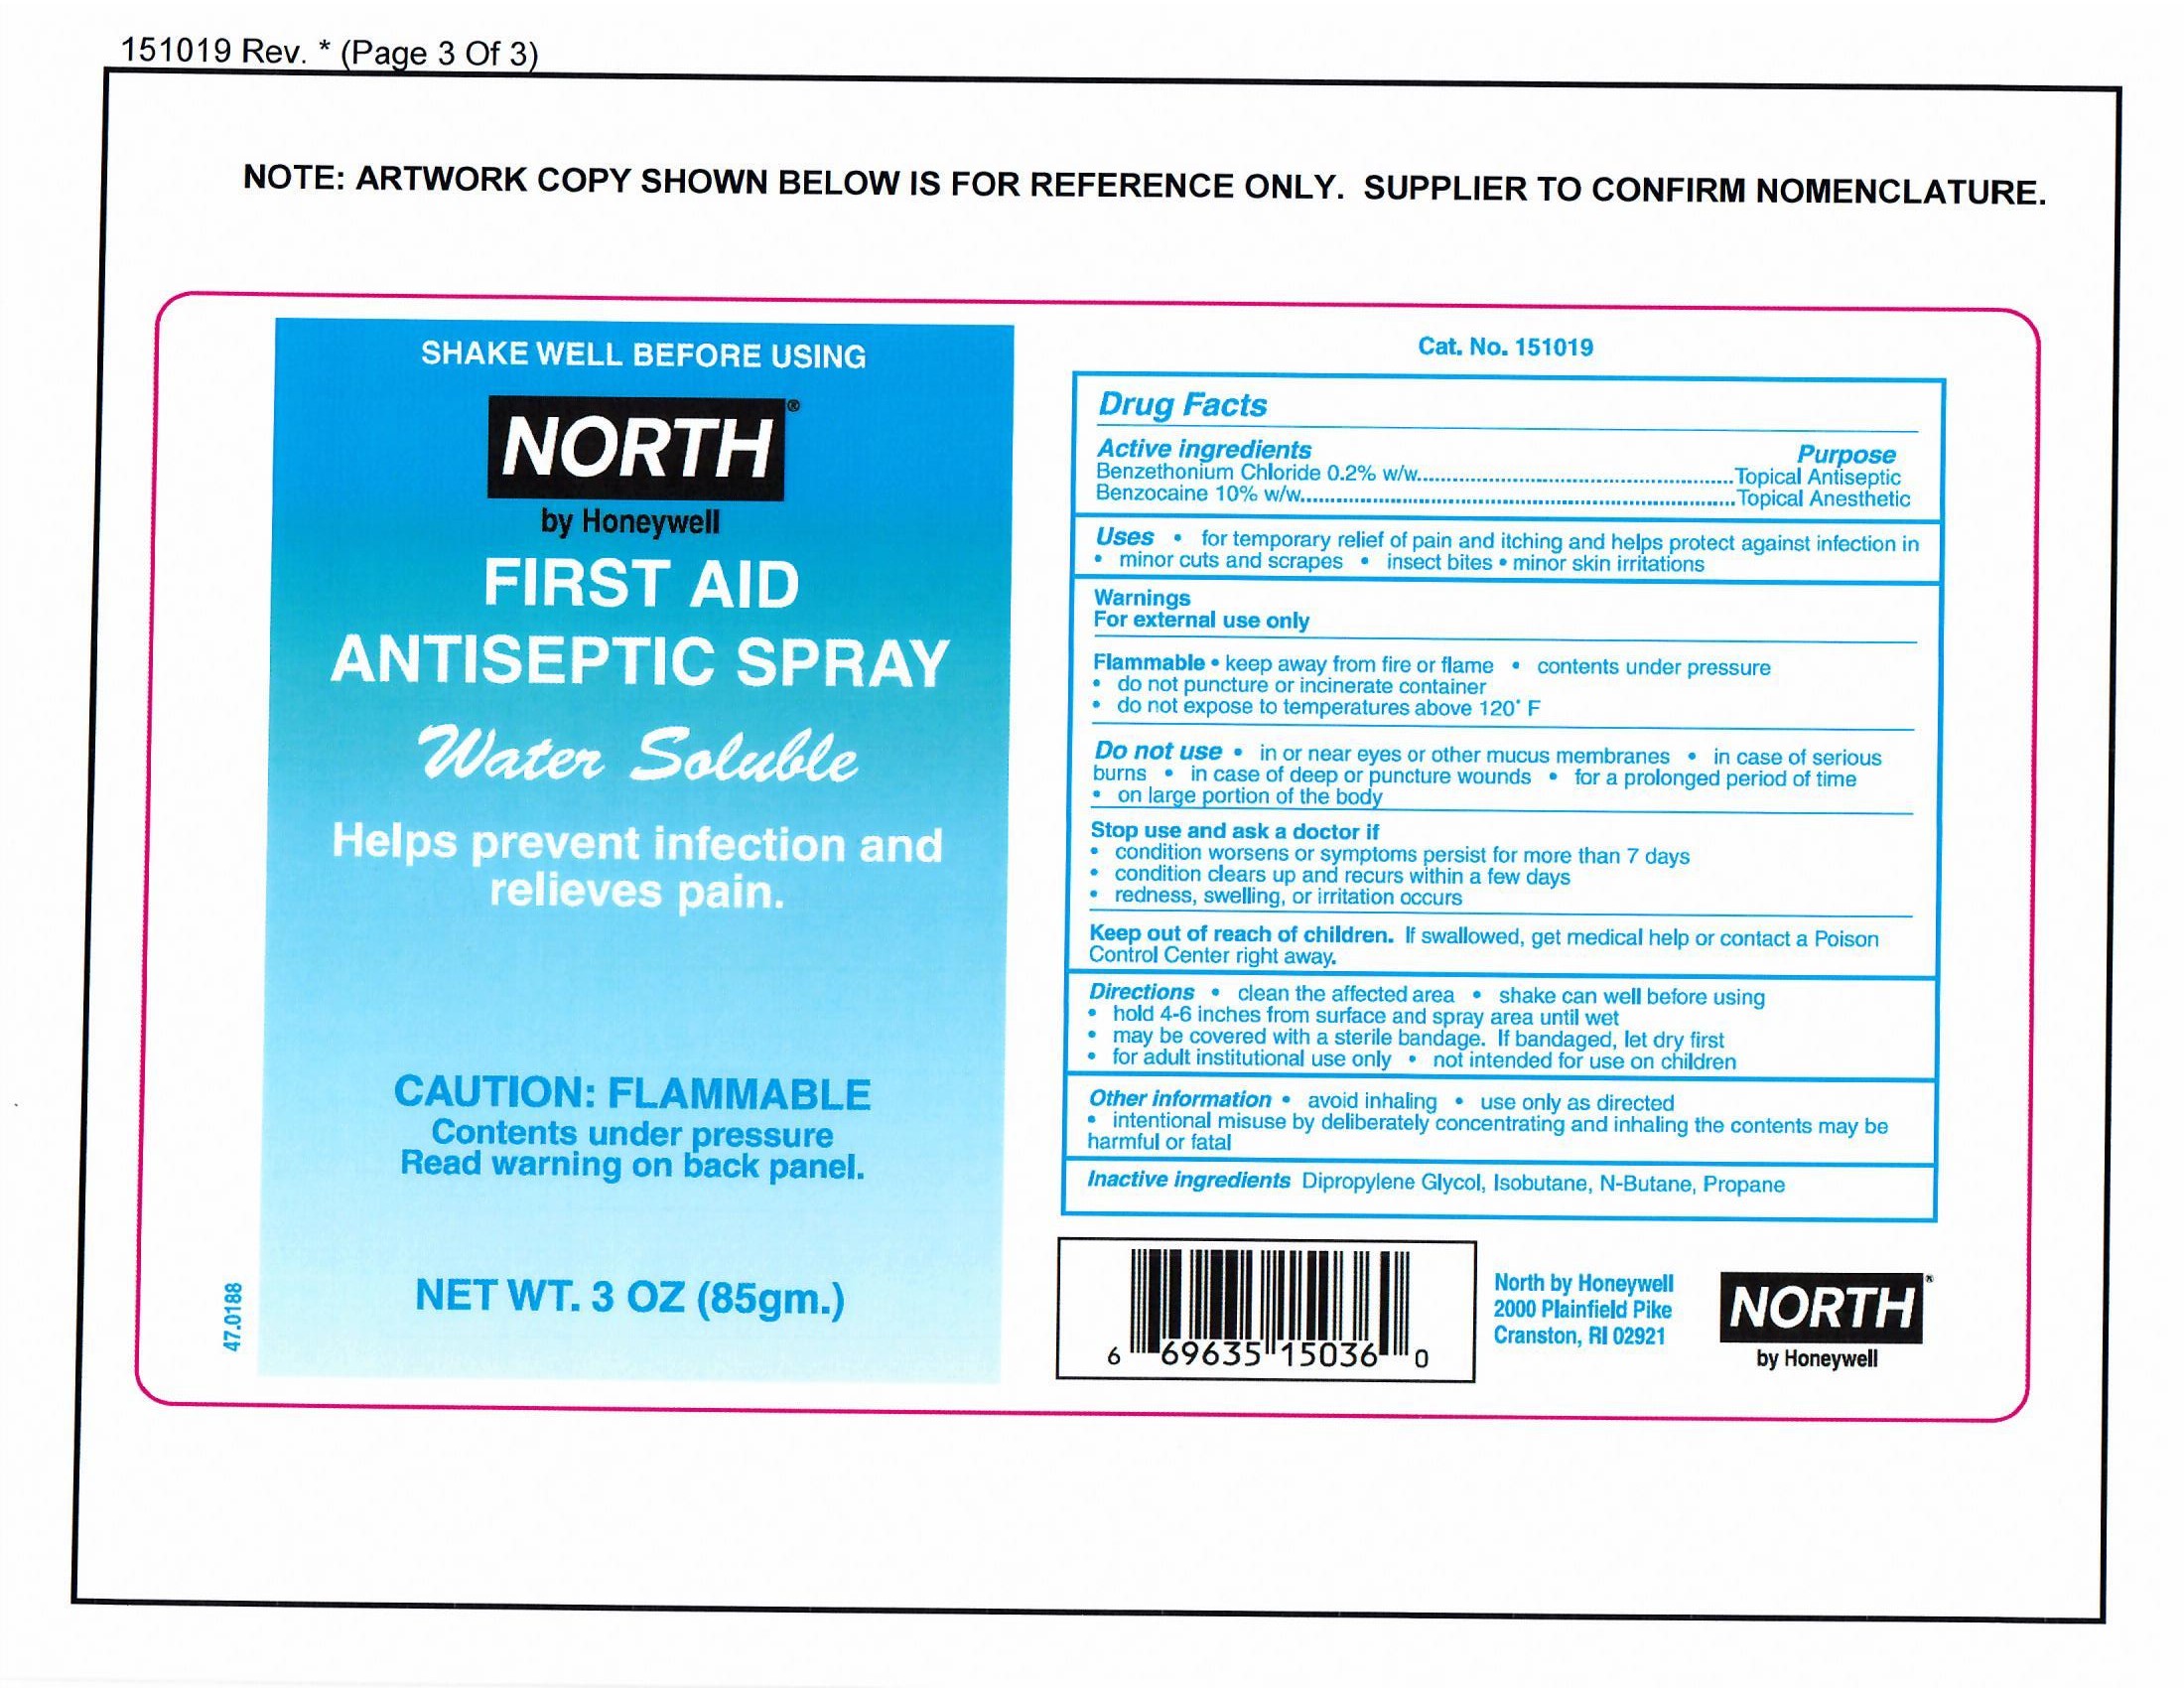 First Aid Antiseptic Spray water soluble